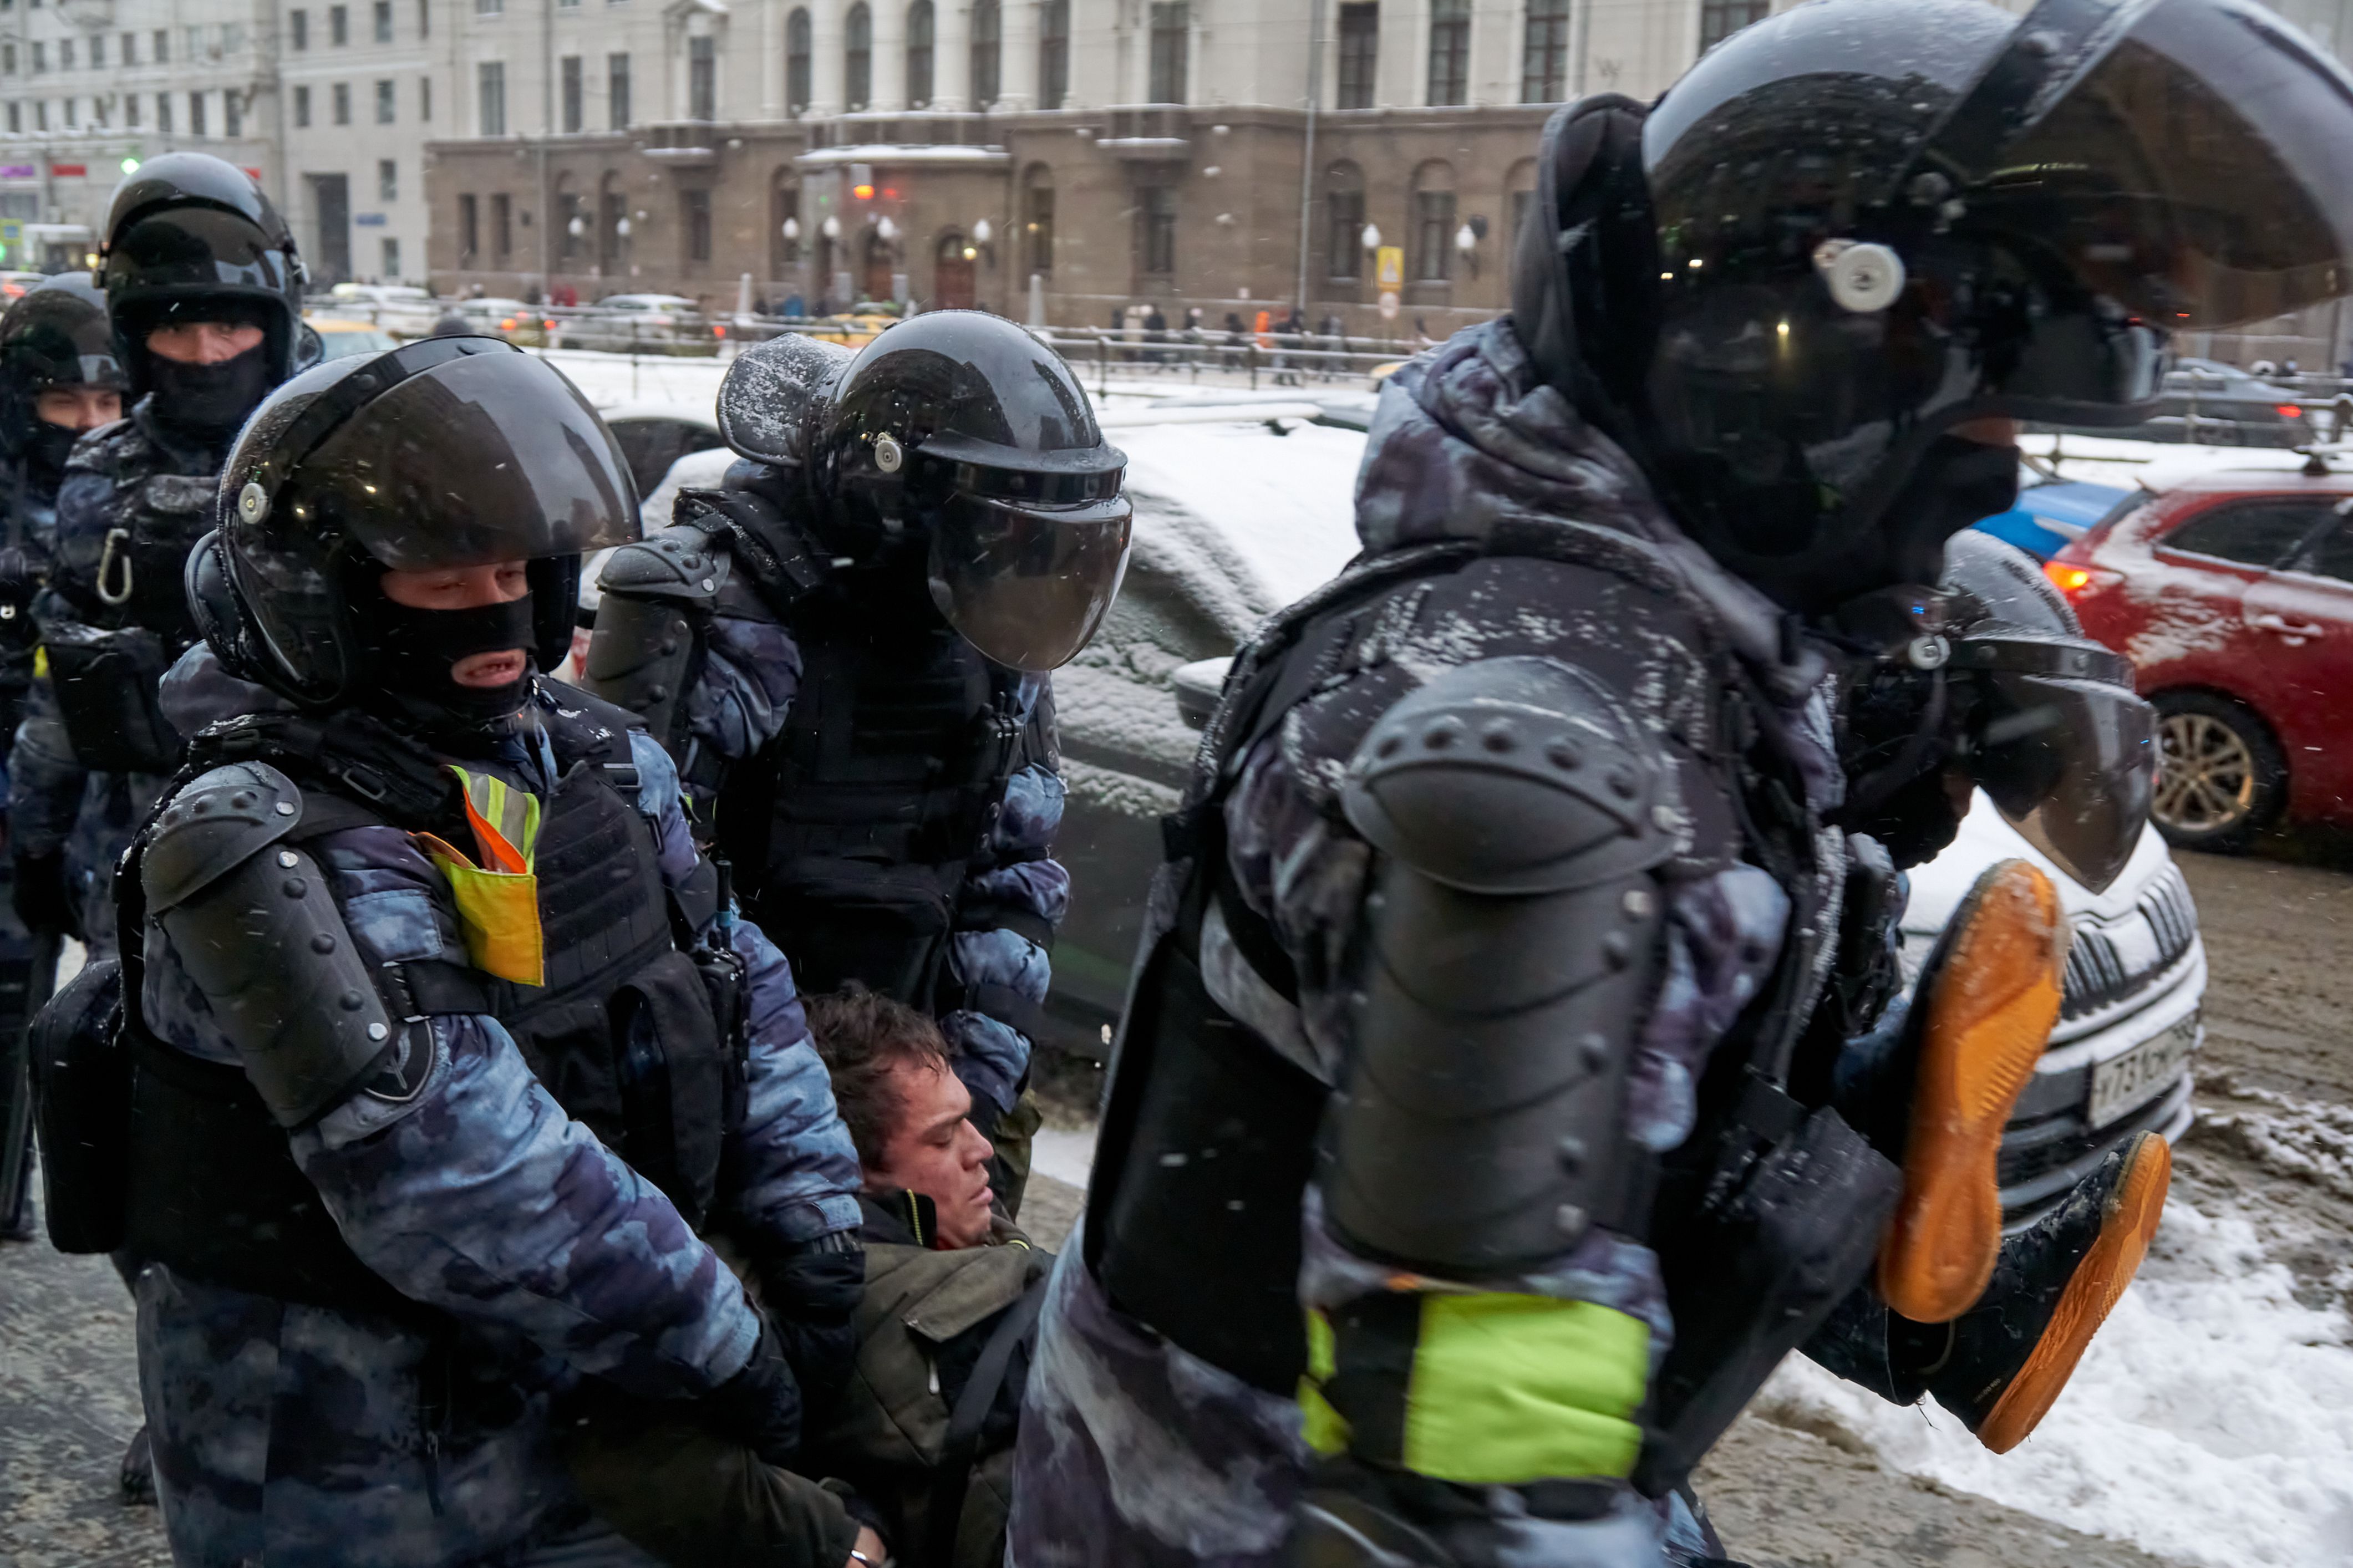 human delivery, national guard, police, demonstration, detained, opposition, politician, Navalny, rally, protest, confrontation, street, Siergiejevicz Mihail